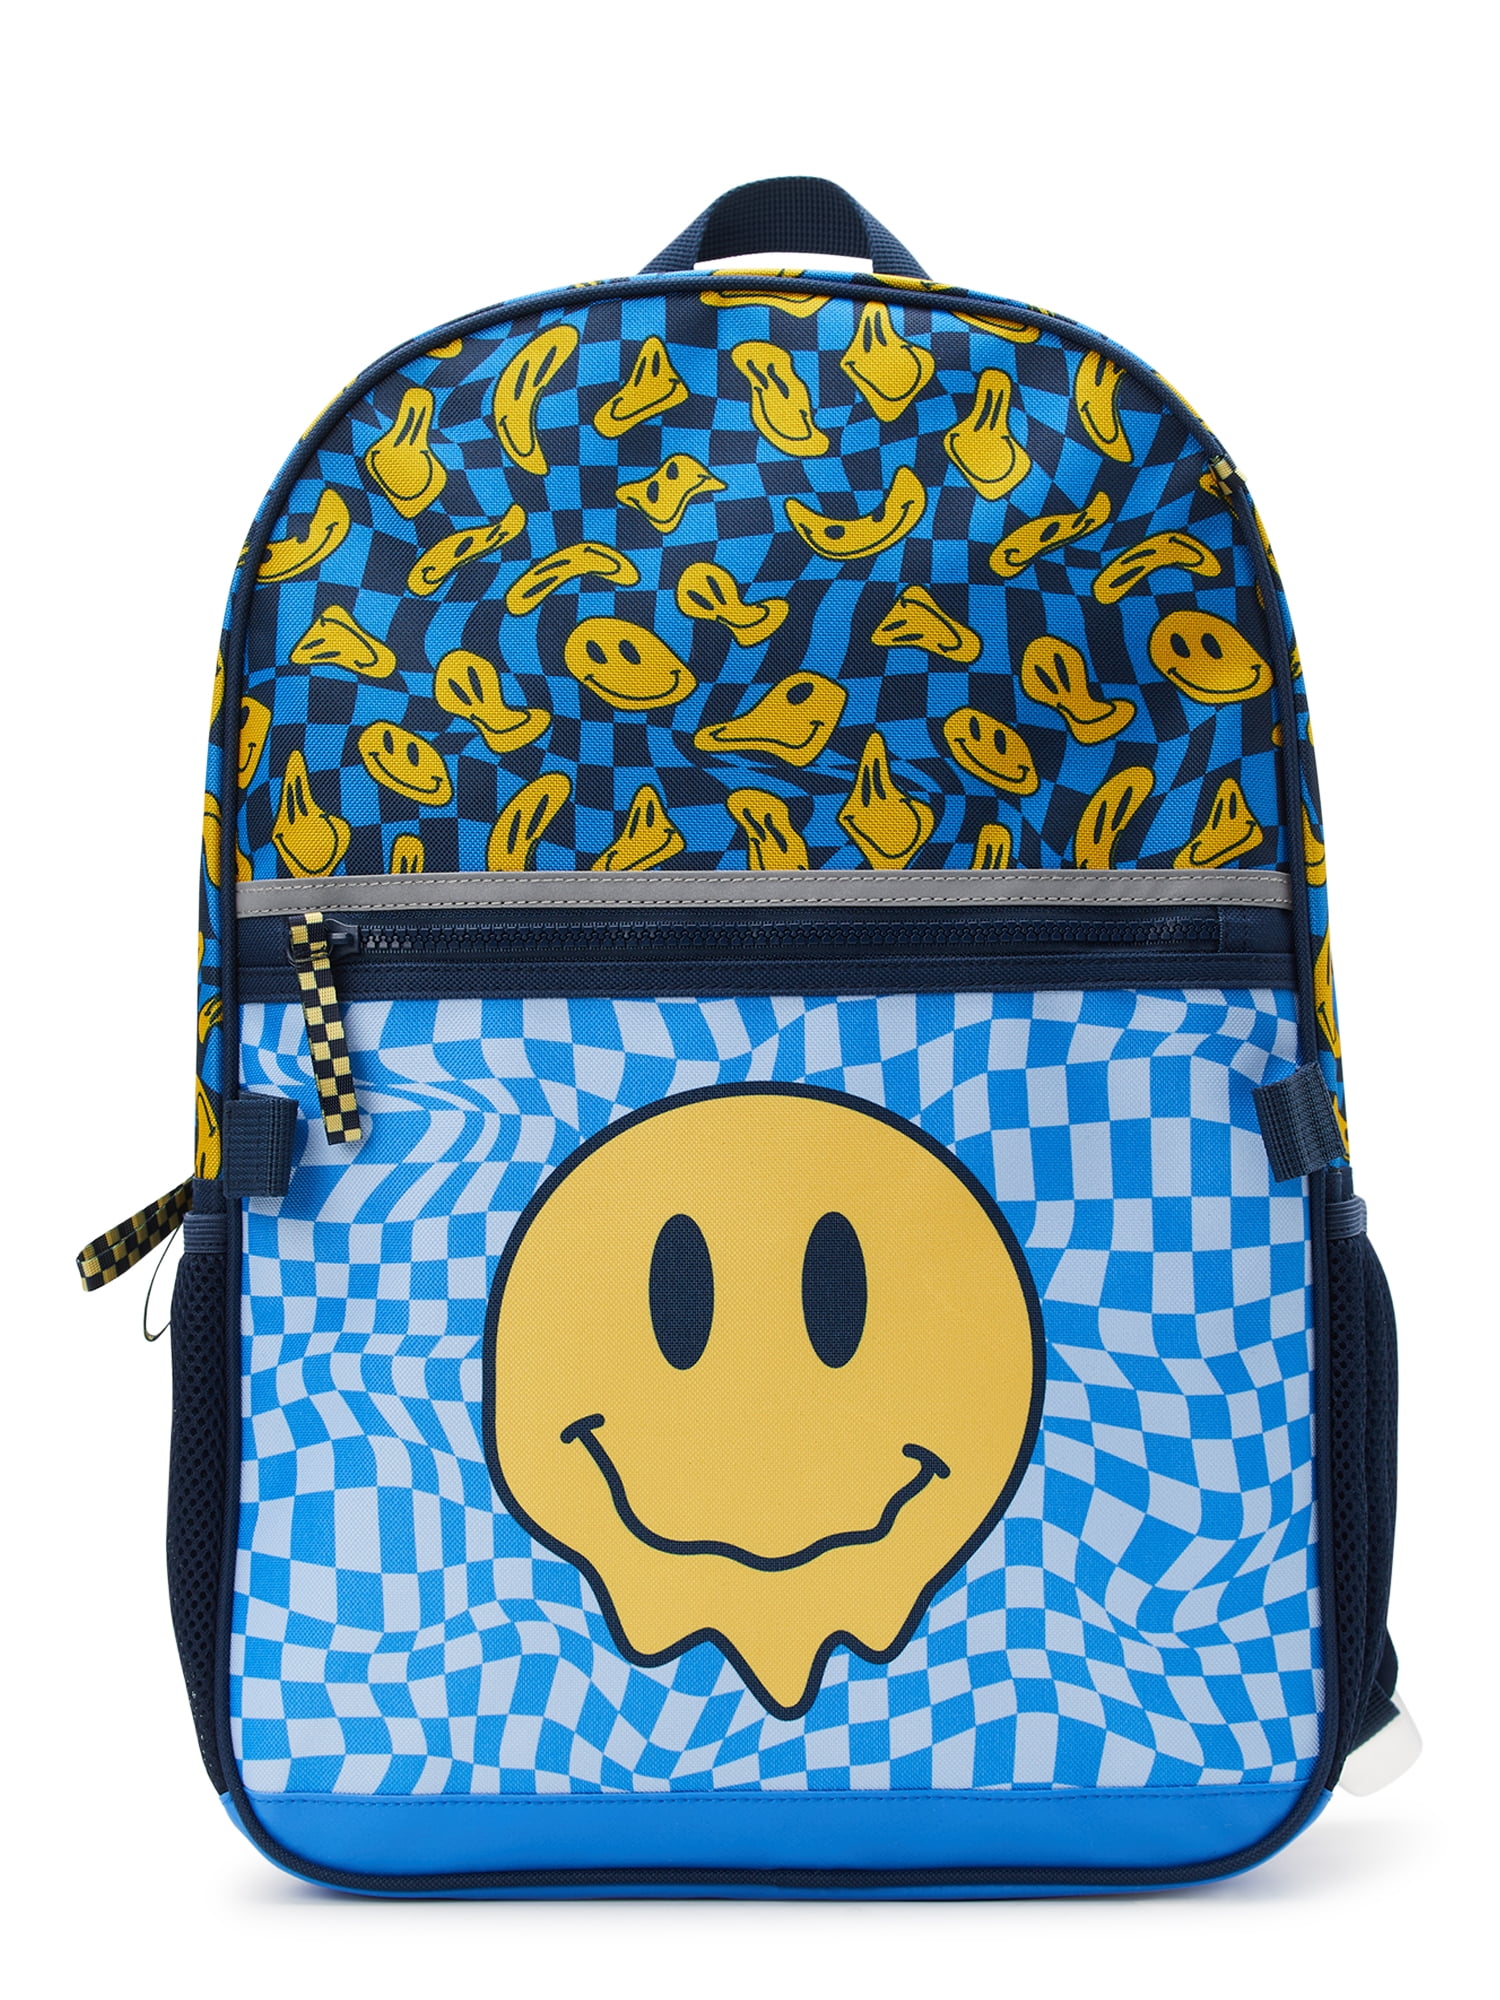 Flippi Smiley Waterproof Backpack for Toddlers & Kids (age 1-4 years) -  Light Blue, Multi-use Bag - Maya Toys